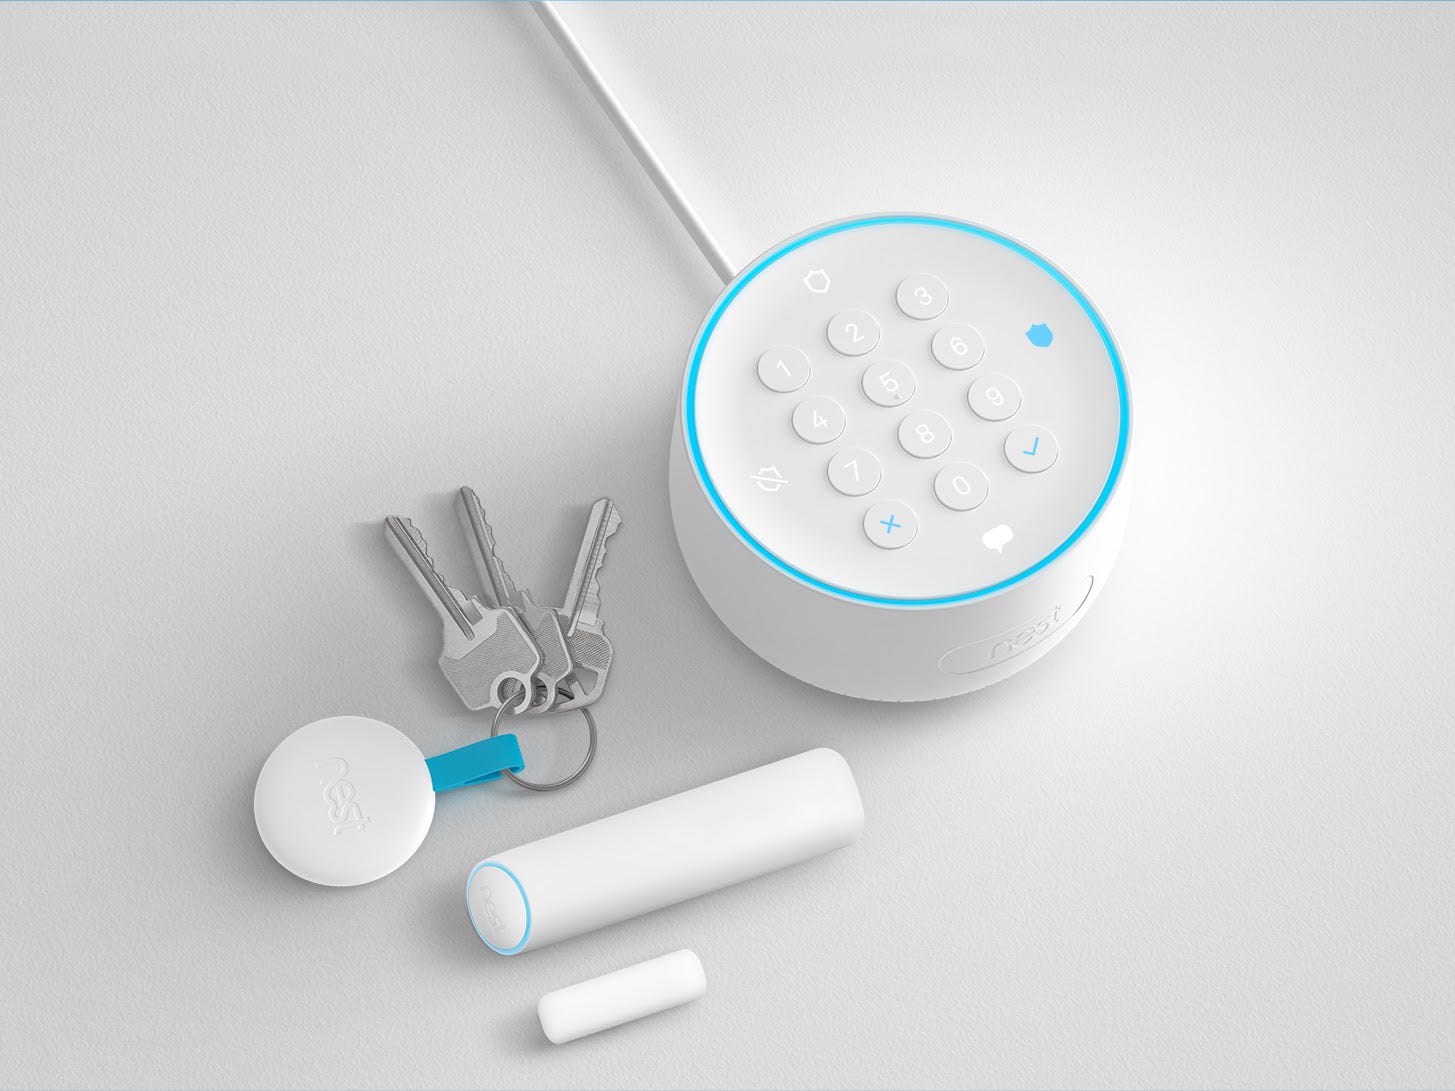 Google kills the Nest Secure, its $500 home security system | Ars Technica